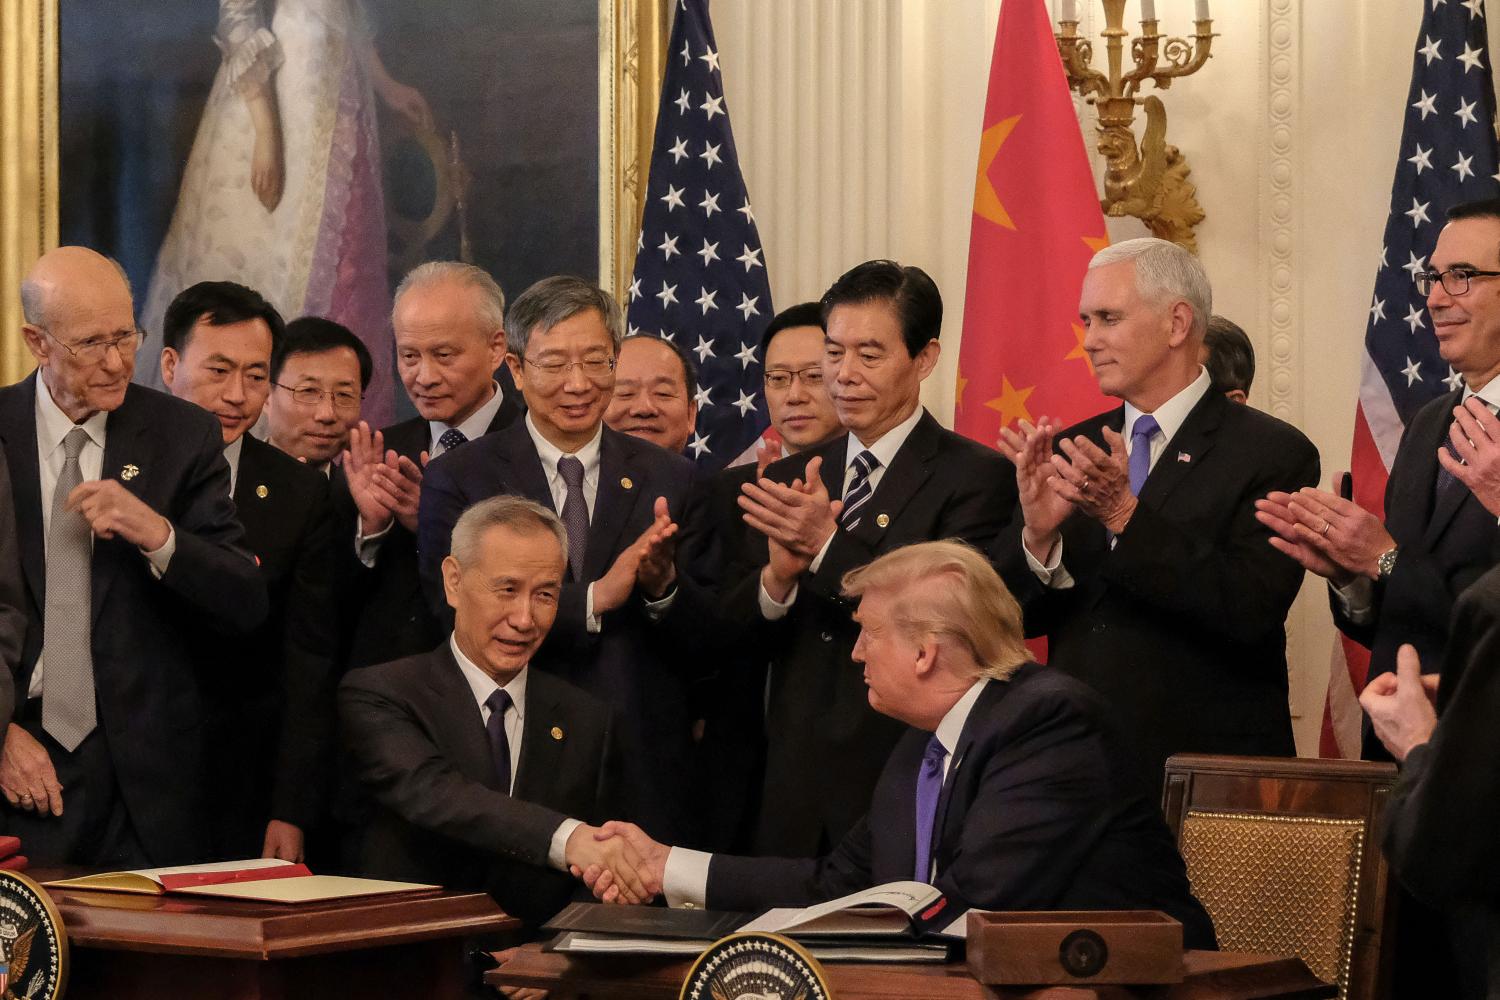 President Donald Trump and Chinese Vice Premier Liu He are applauded after signing the Phase 1 trade deal between the United States and China, during a ceremony in the East Room at the White House on Wednesday, January 15, 2020. The Phase 1 deal will cancel upcoming planned tariffs on Chinese-made products and reduces others while Chine has agreed to increase purchases of U.S. farm products and other goods. Photo by Alex Wroblewski/Pool/ABACAPRESS.COM